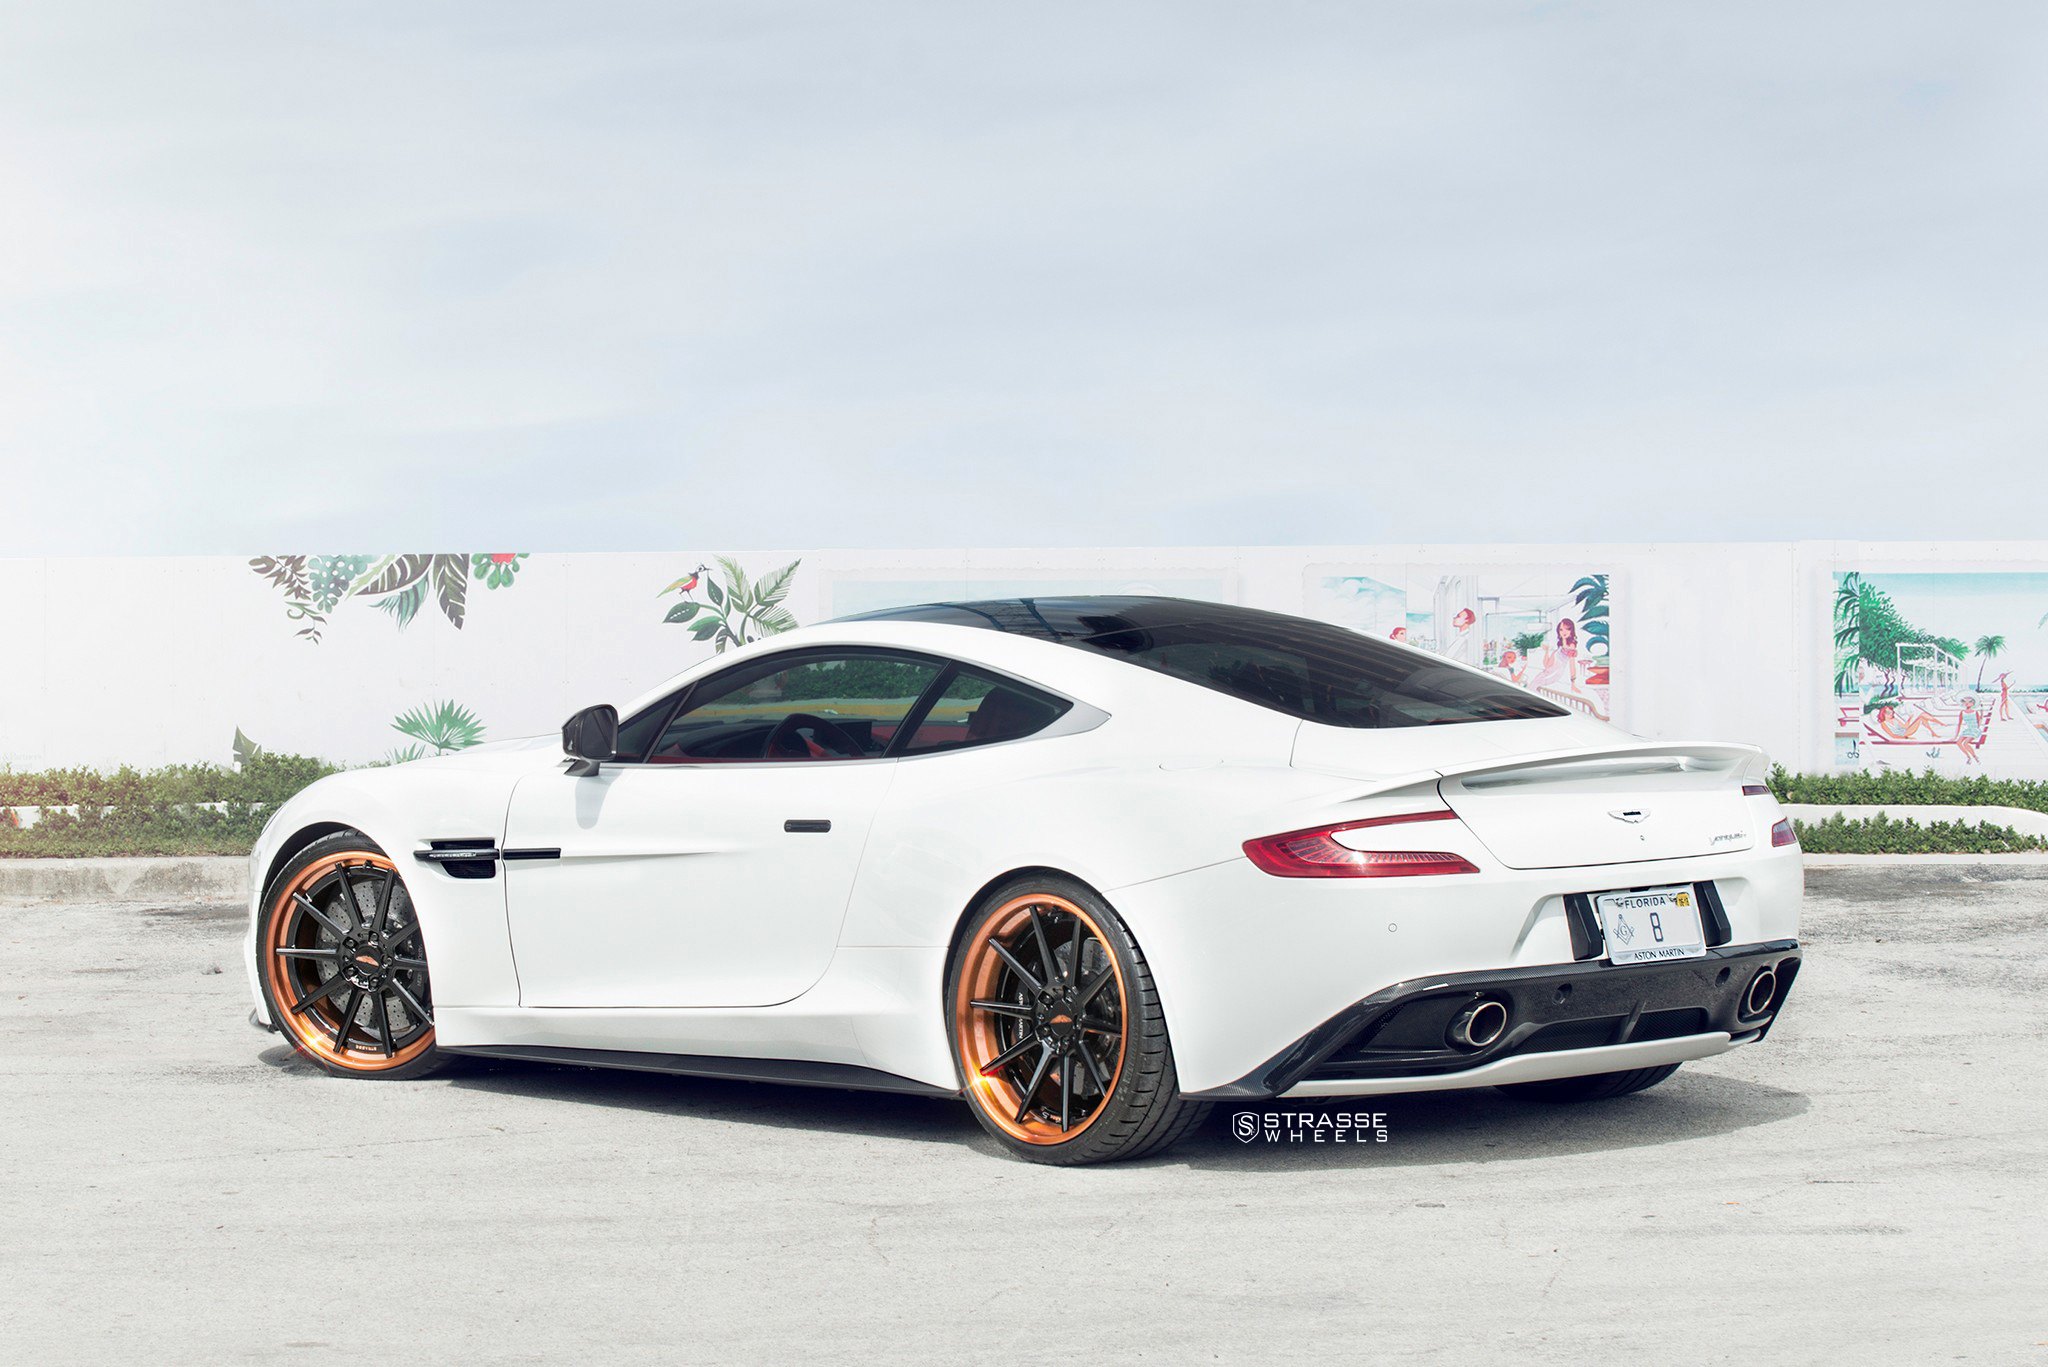 White Aston Martin Vanquish with Custom Style Rear Spoiler - Photo by Strasse Wheels